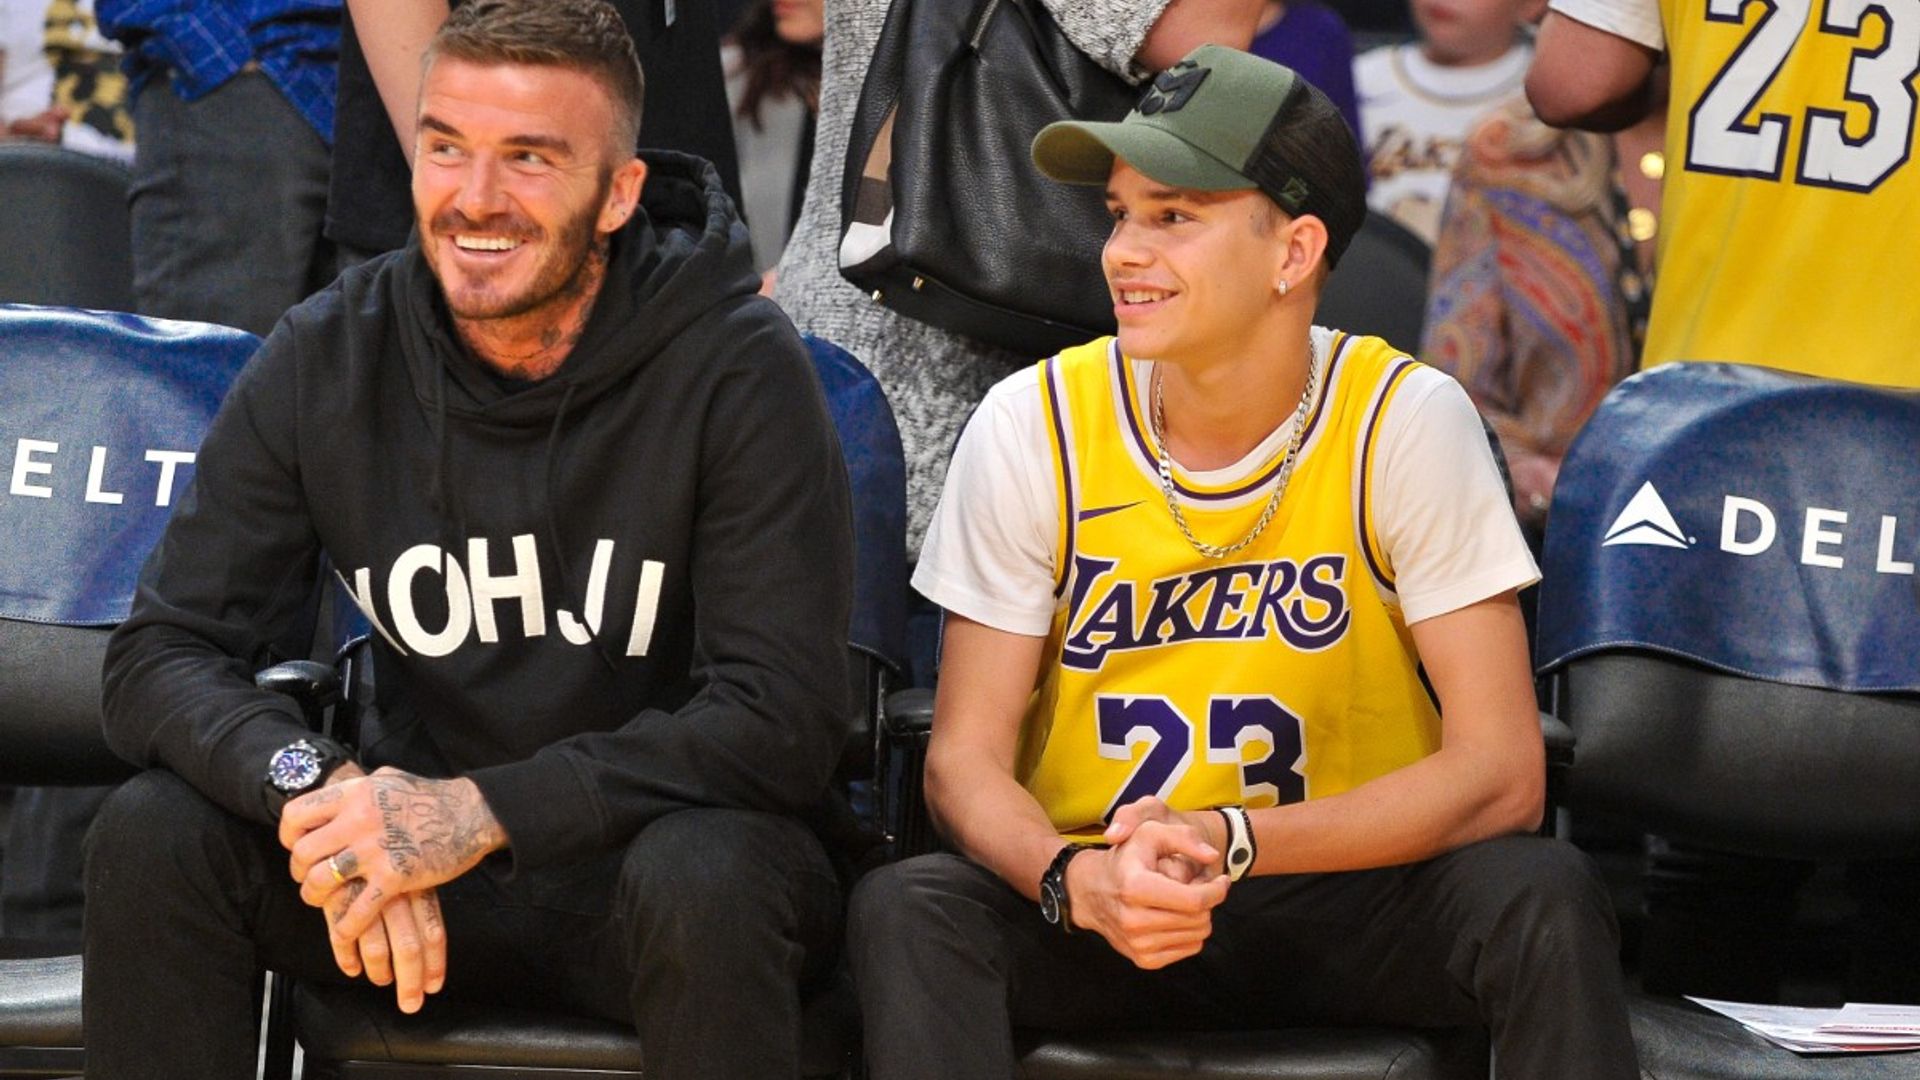 David Beckham shares rare photos from special day out with his children